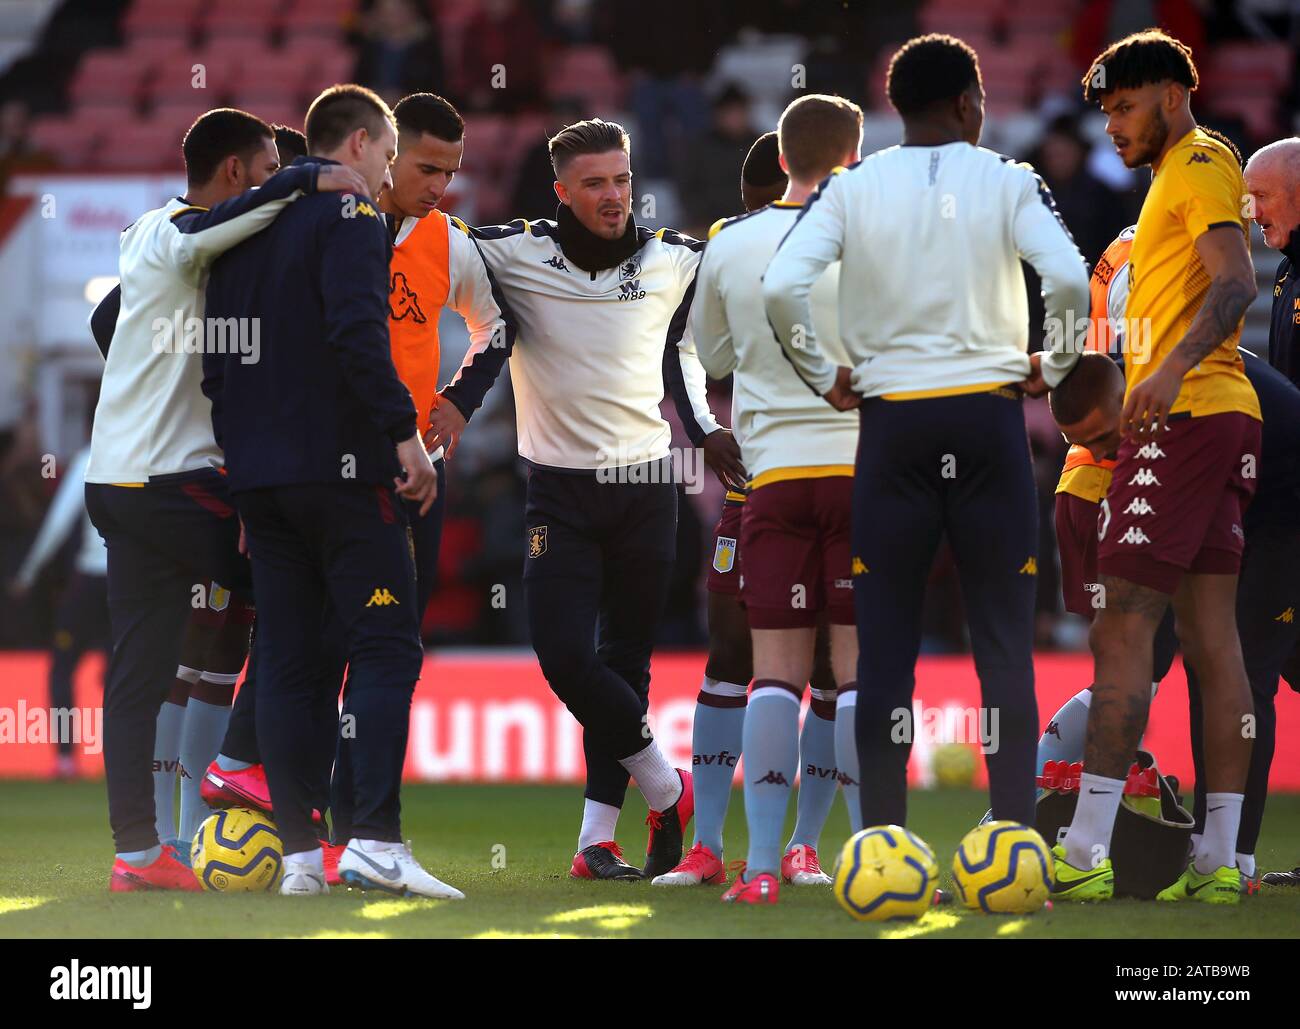 Aston Villa's Assistant Head Coach John Terry gathers the team for a talk ahead of the Premier League match at the Vitality Stadium, Bournemouth. Stock Photo